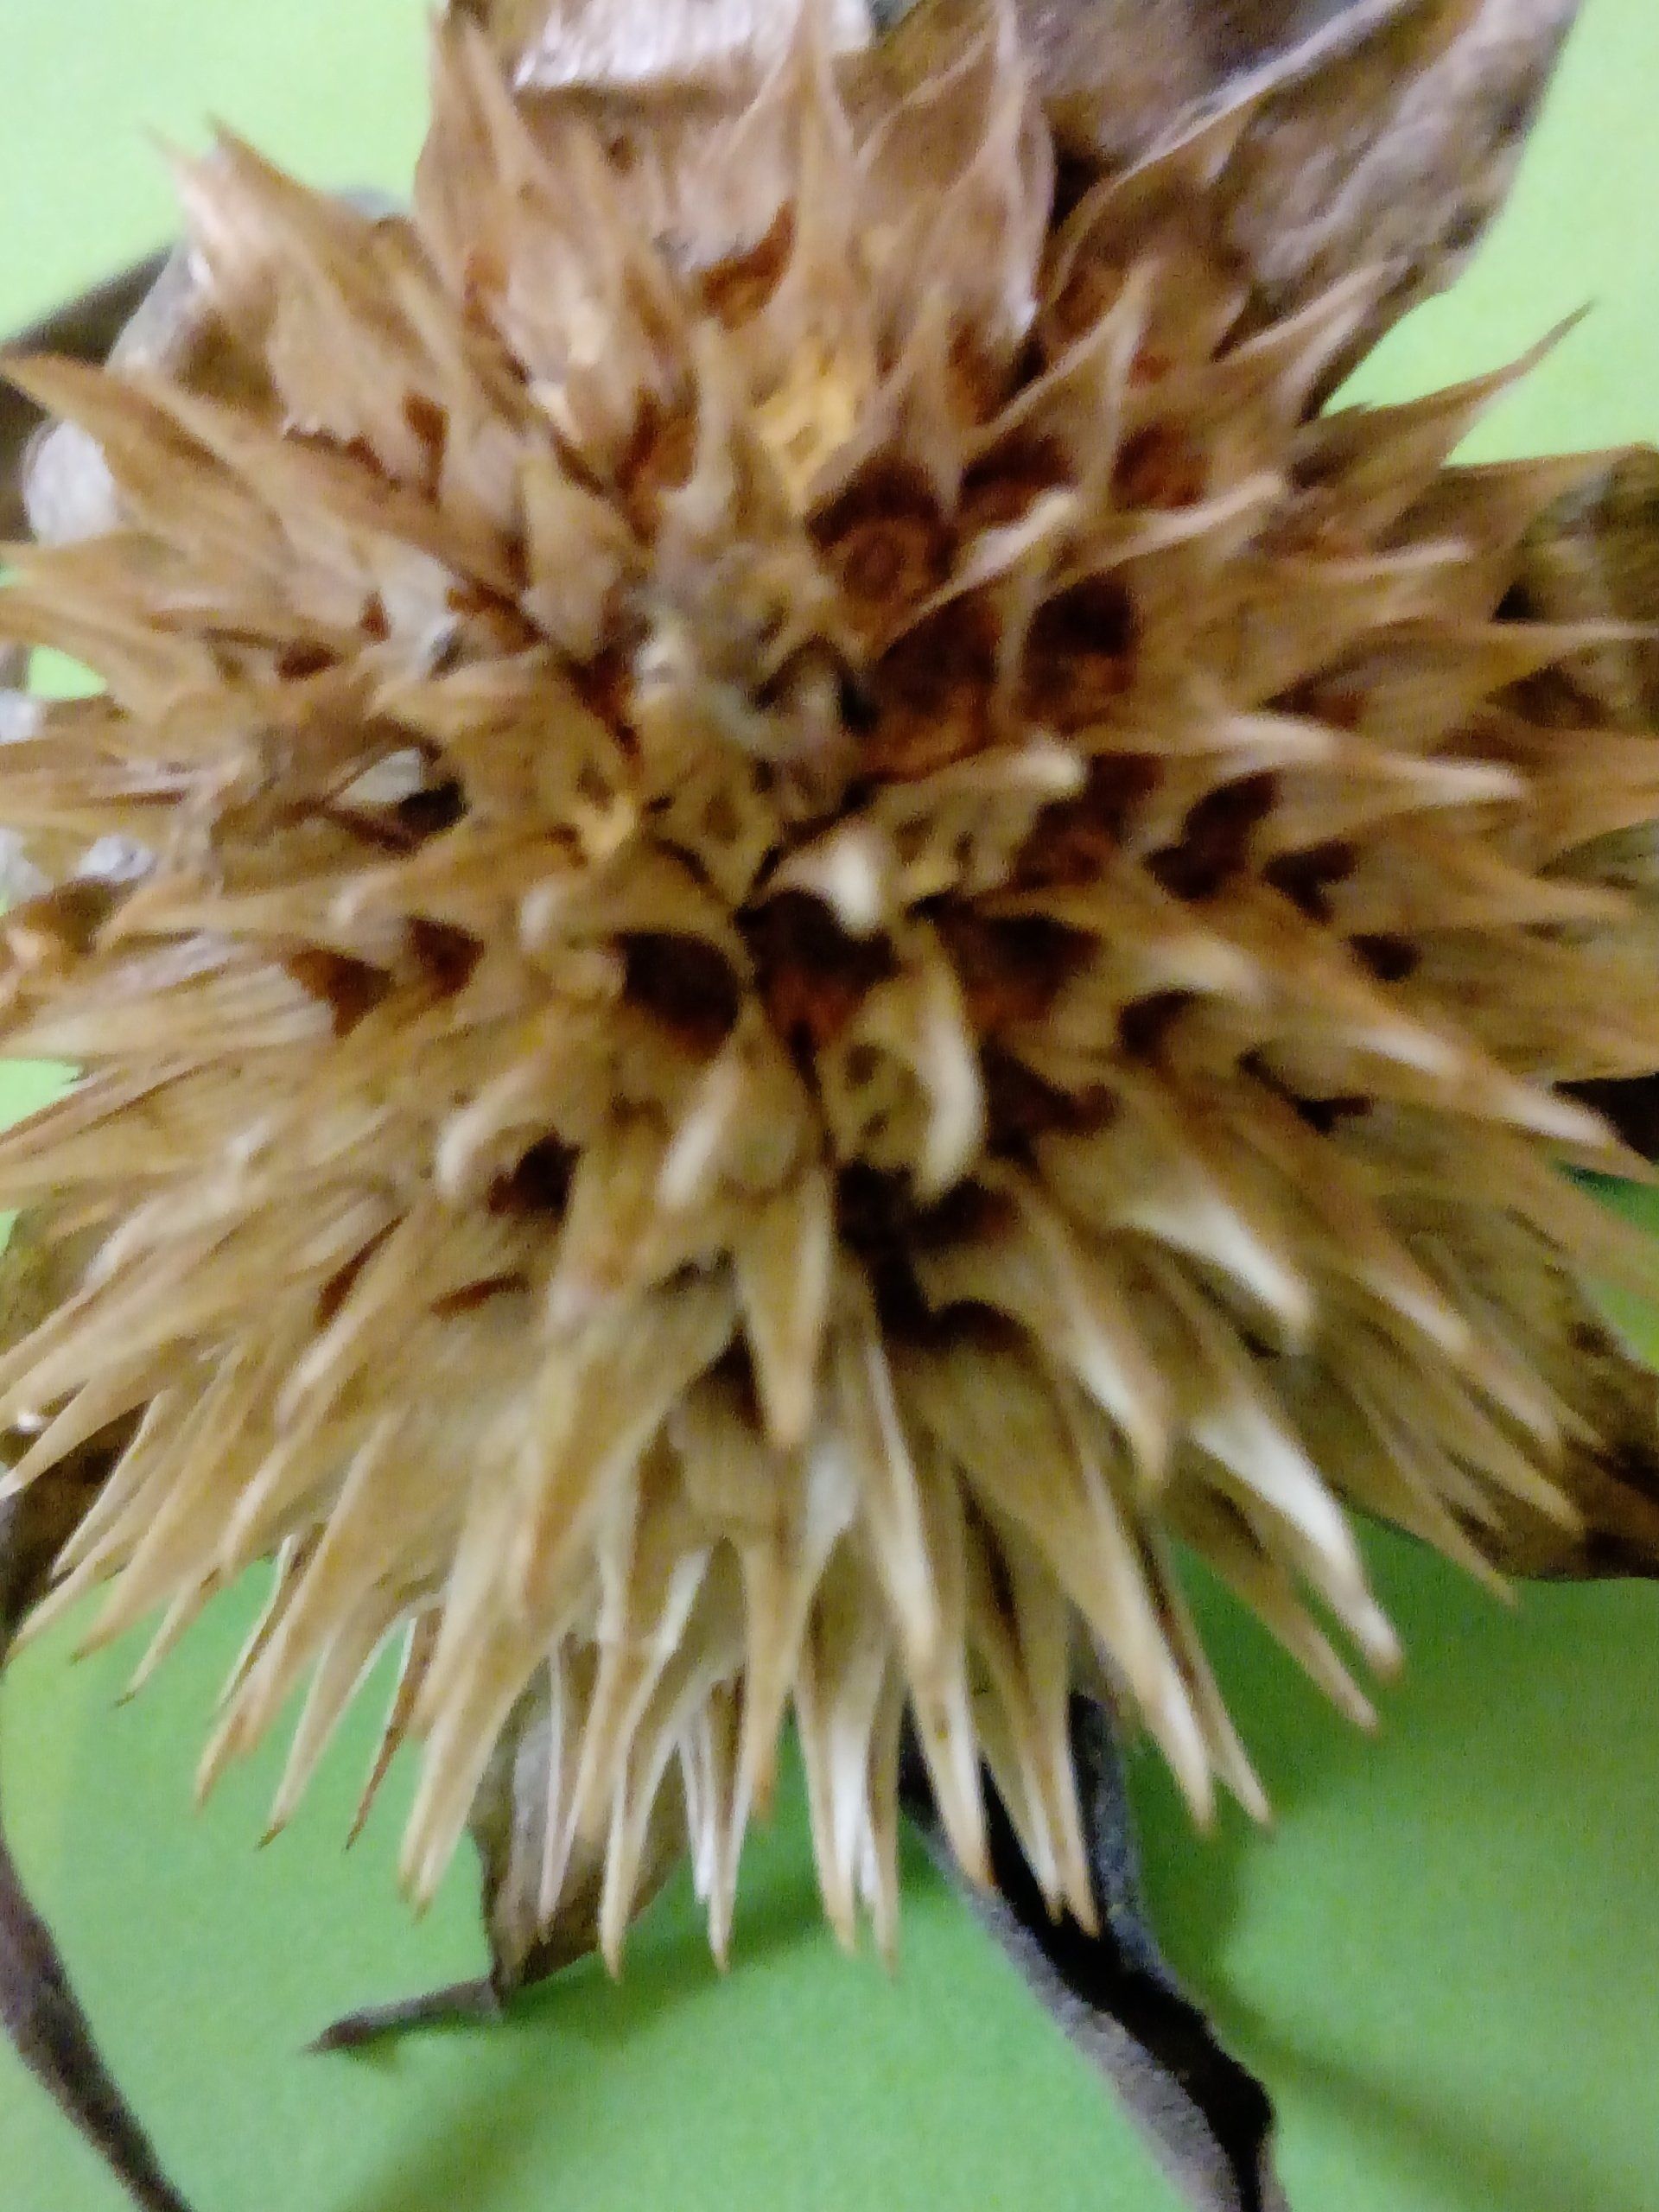 Tithonia Seed head with brown seeds inside